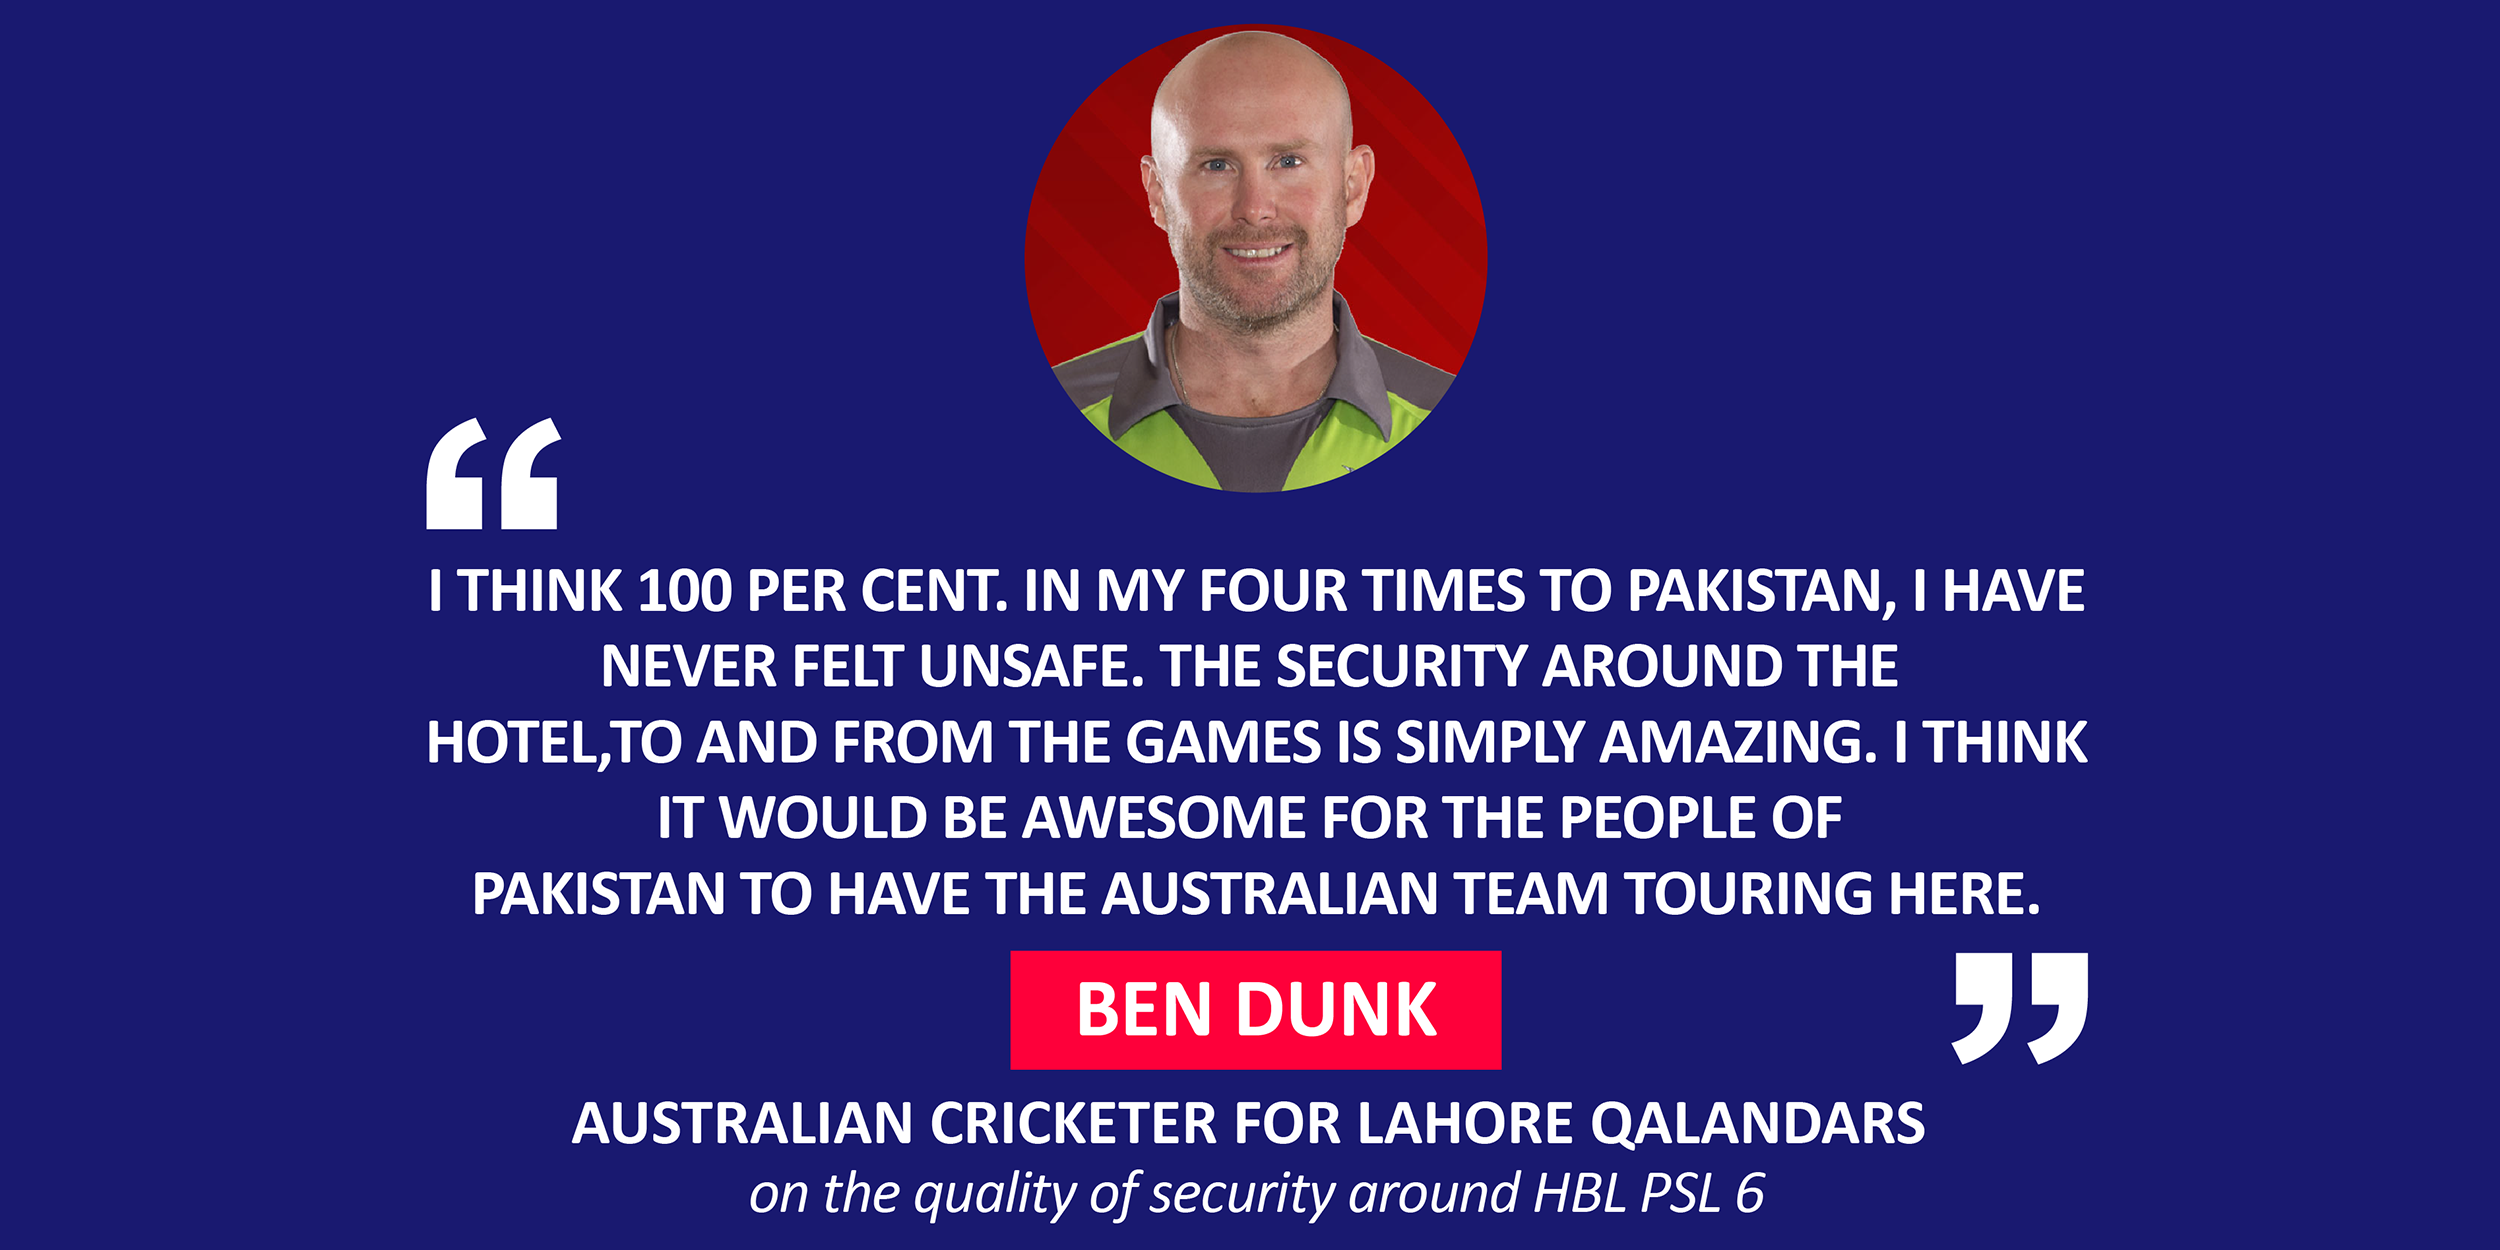 Ben Dunk, Australian Cricketer for Lahore Qalandars on the quality of security around HBL PSL 6